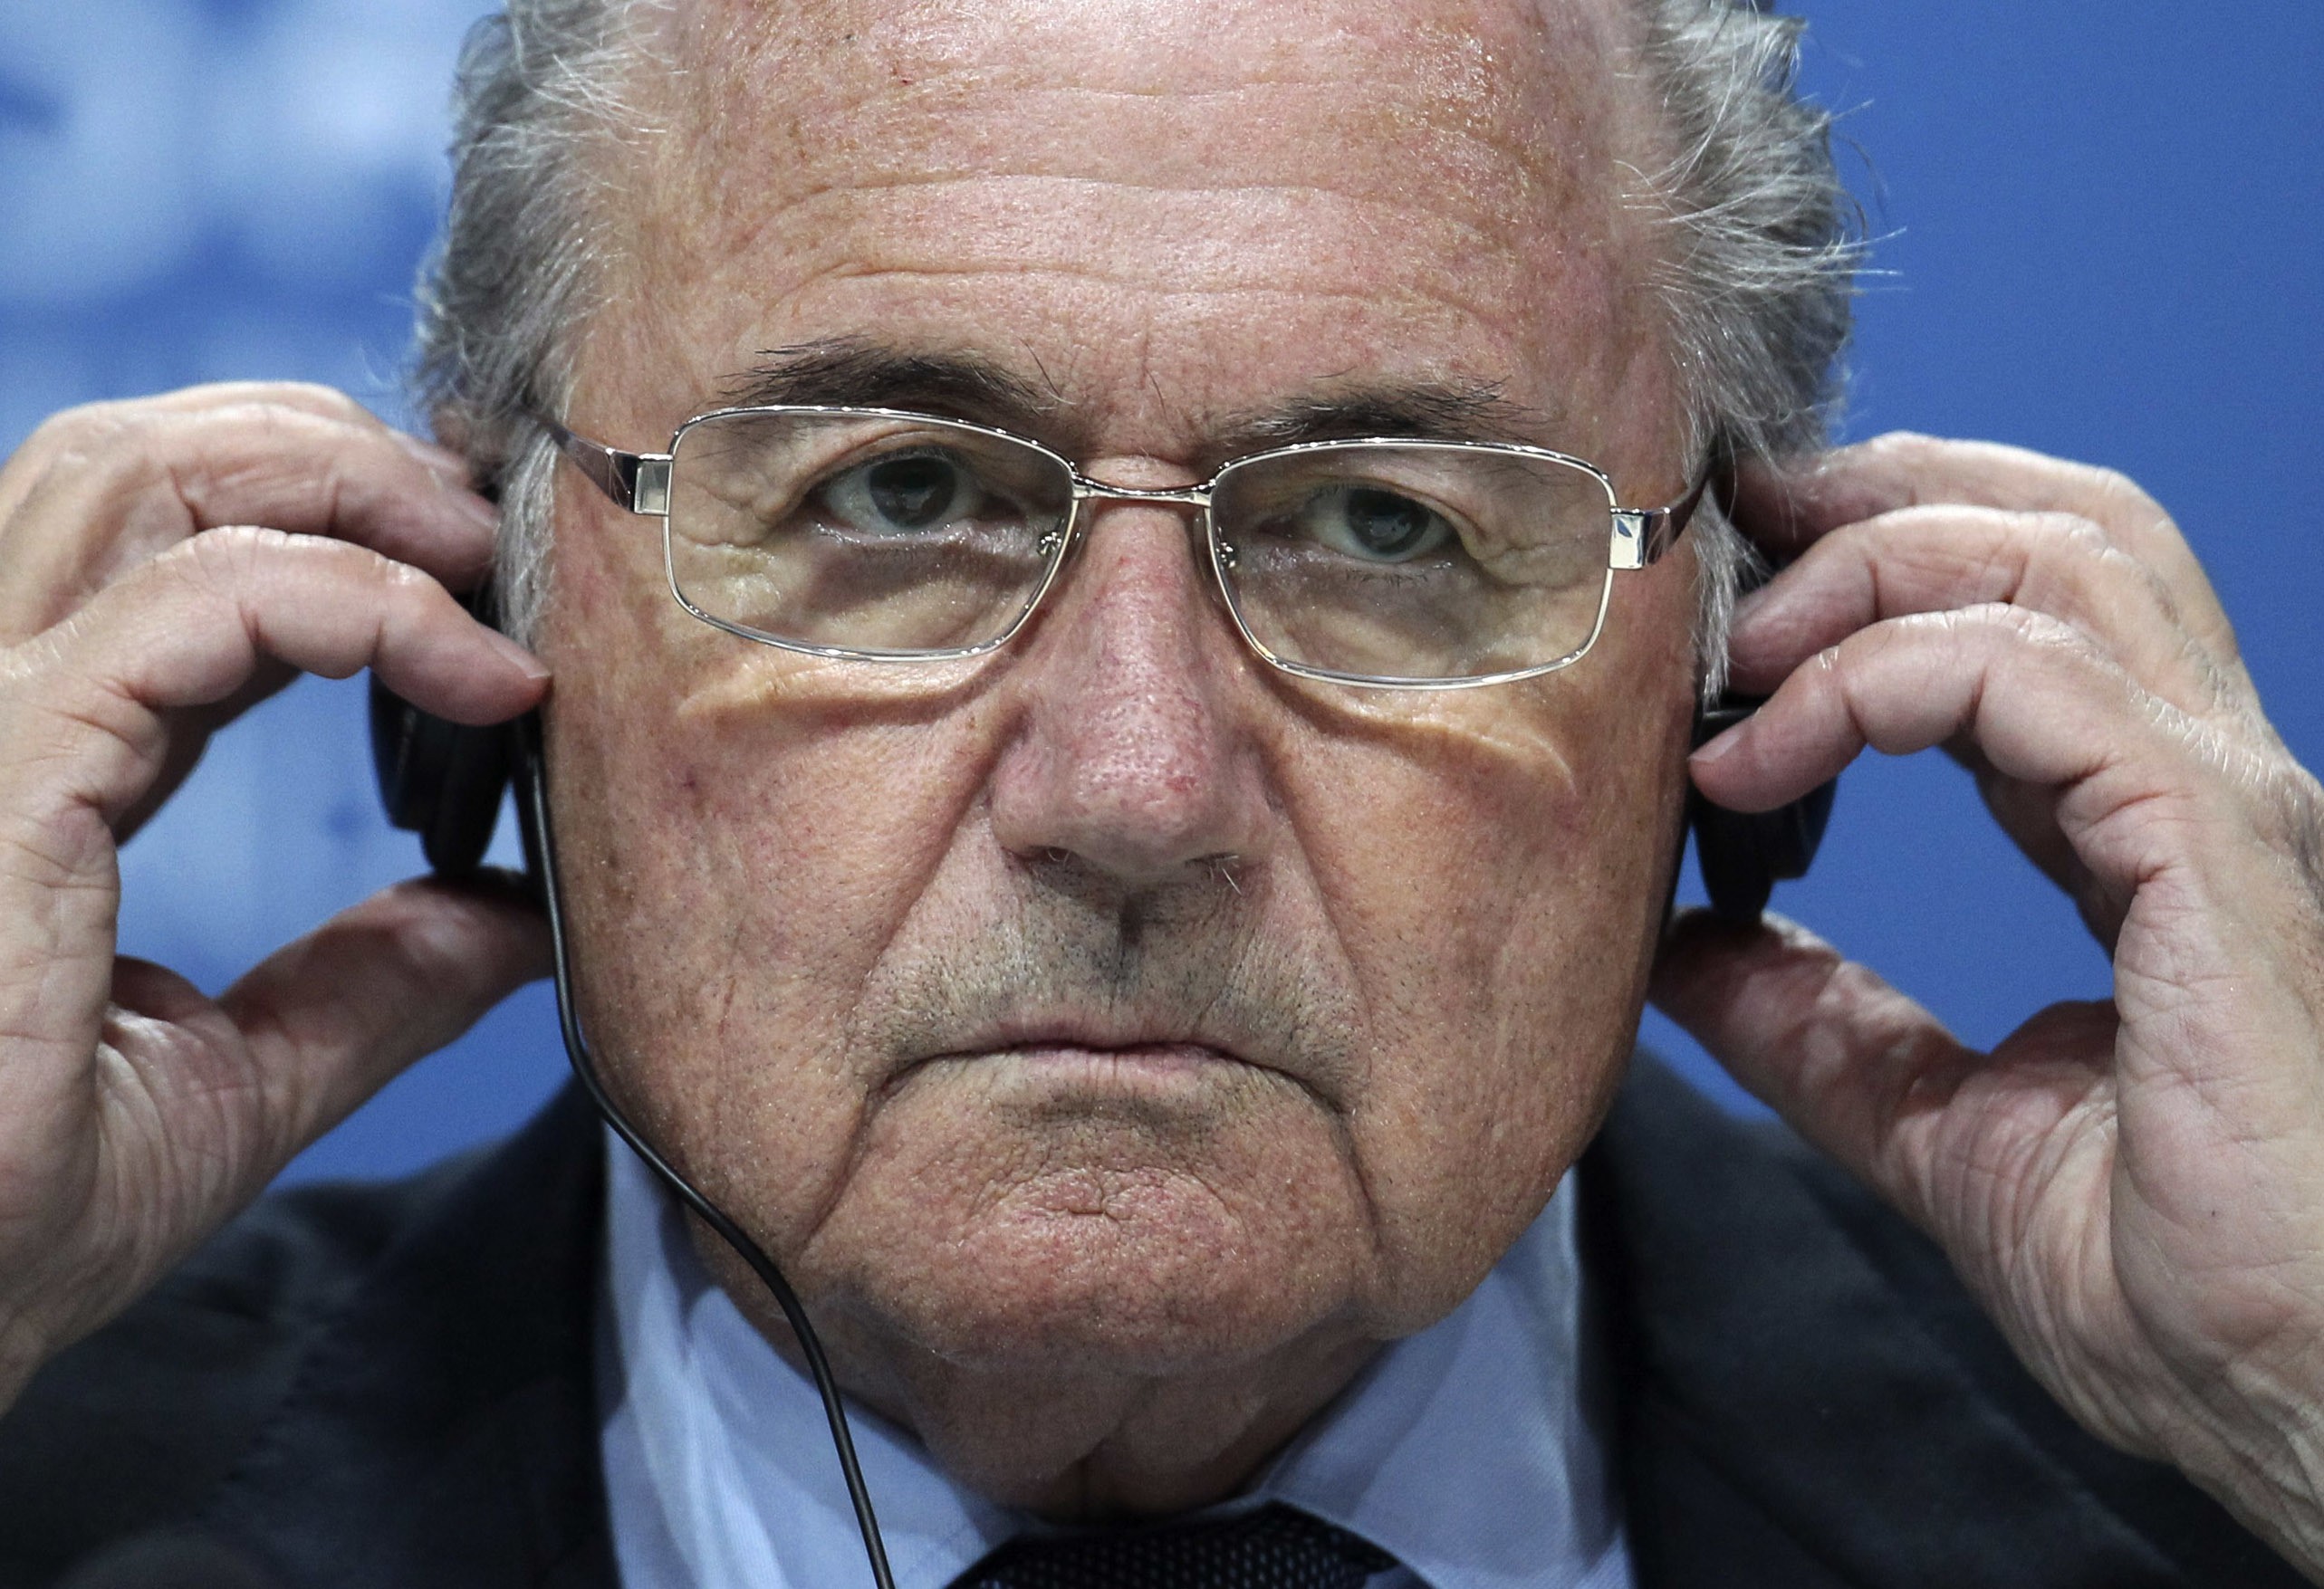 Disgraced former Fifa chief wants to challenge his suspension, saying it’s time to question the decision of the world governing body’s ethics committee